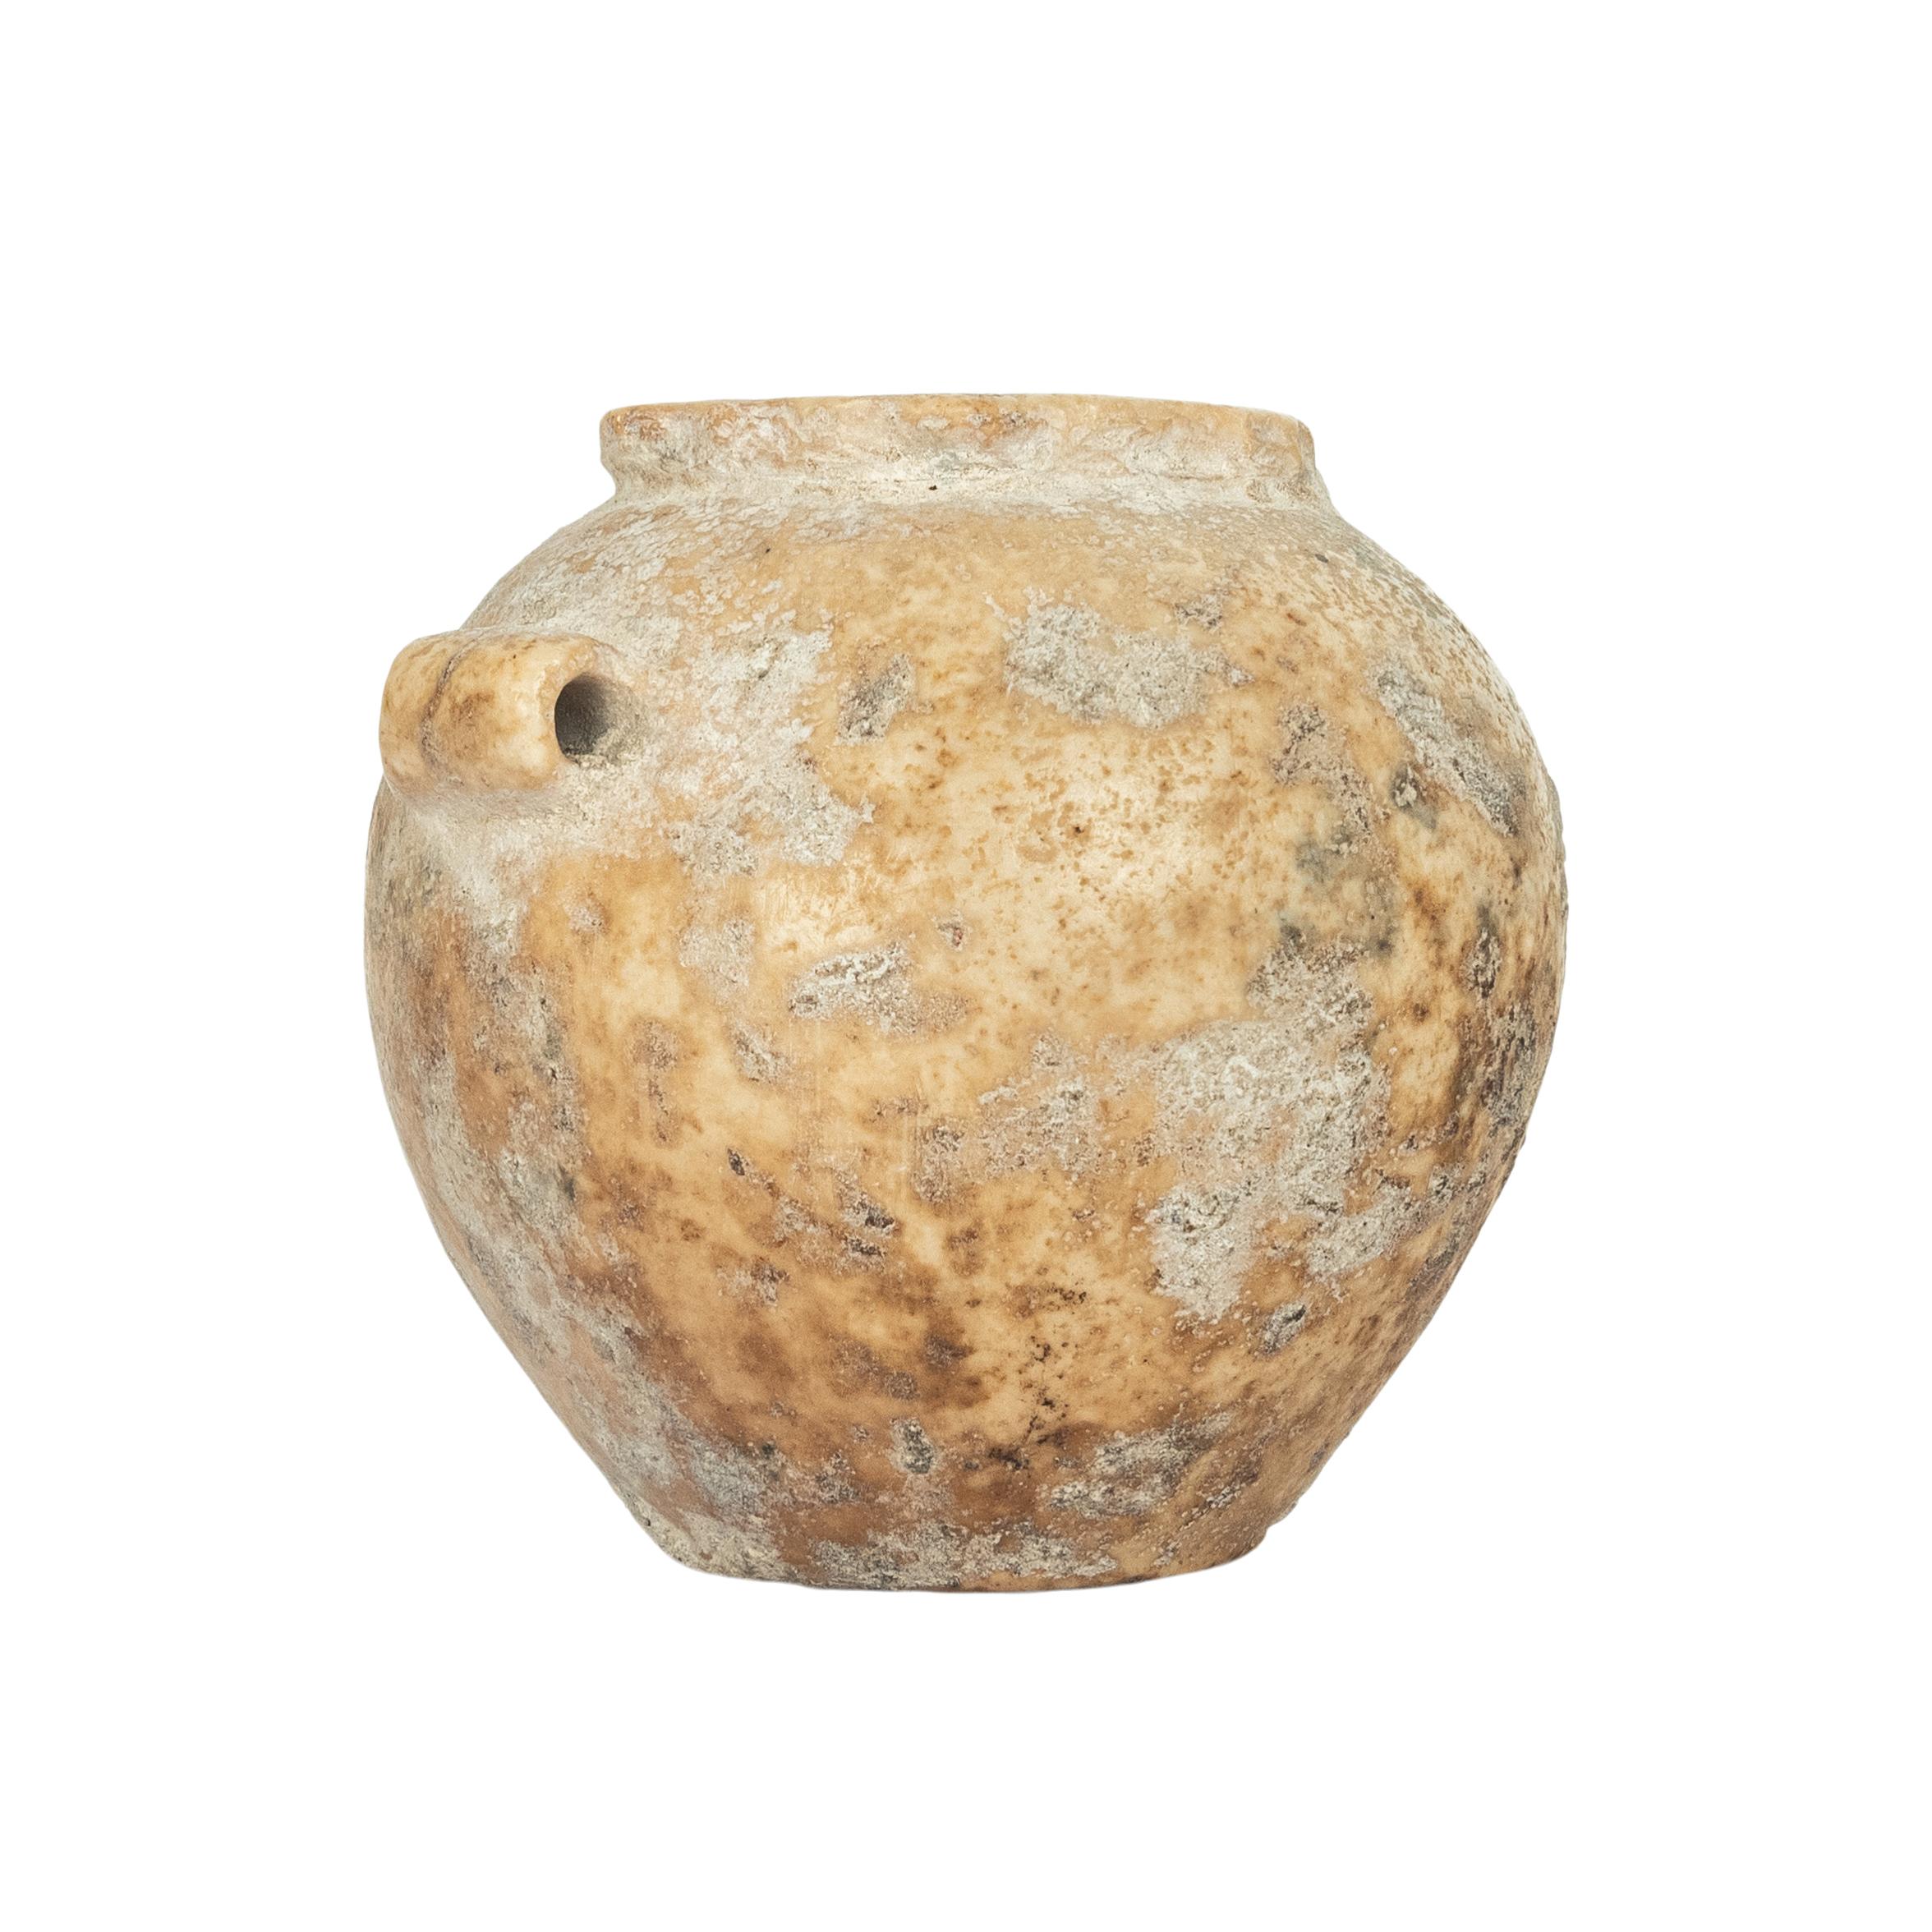 Ancient Egyptian Old Kingdom Miniature Lime Stone Vessel Jar 2600-2800 BCE In Good Condition For Sale In Portland, OR